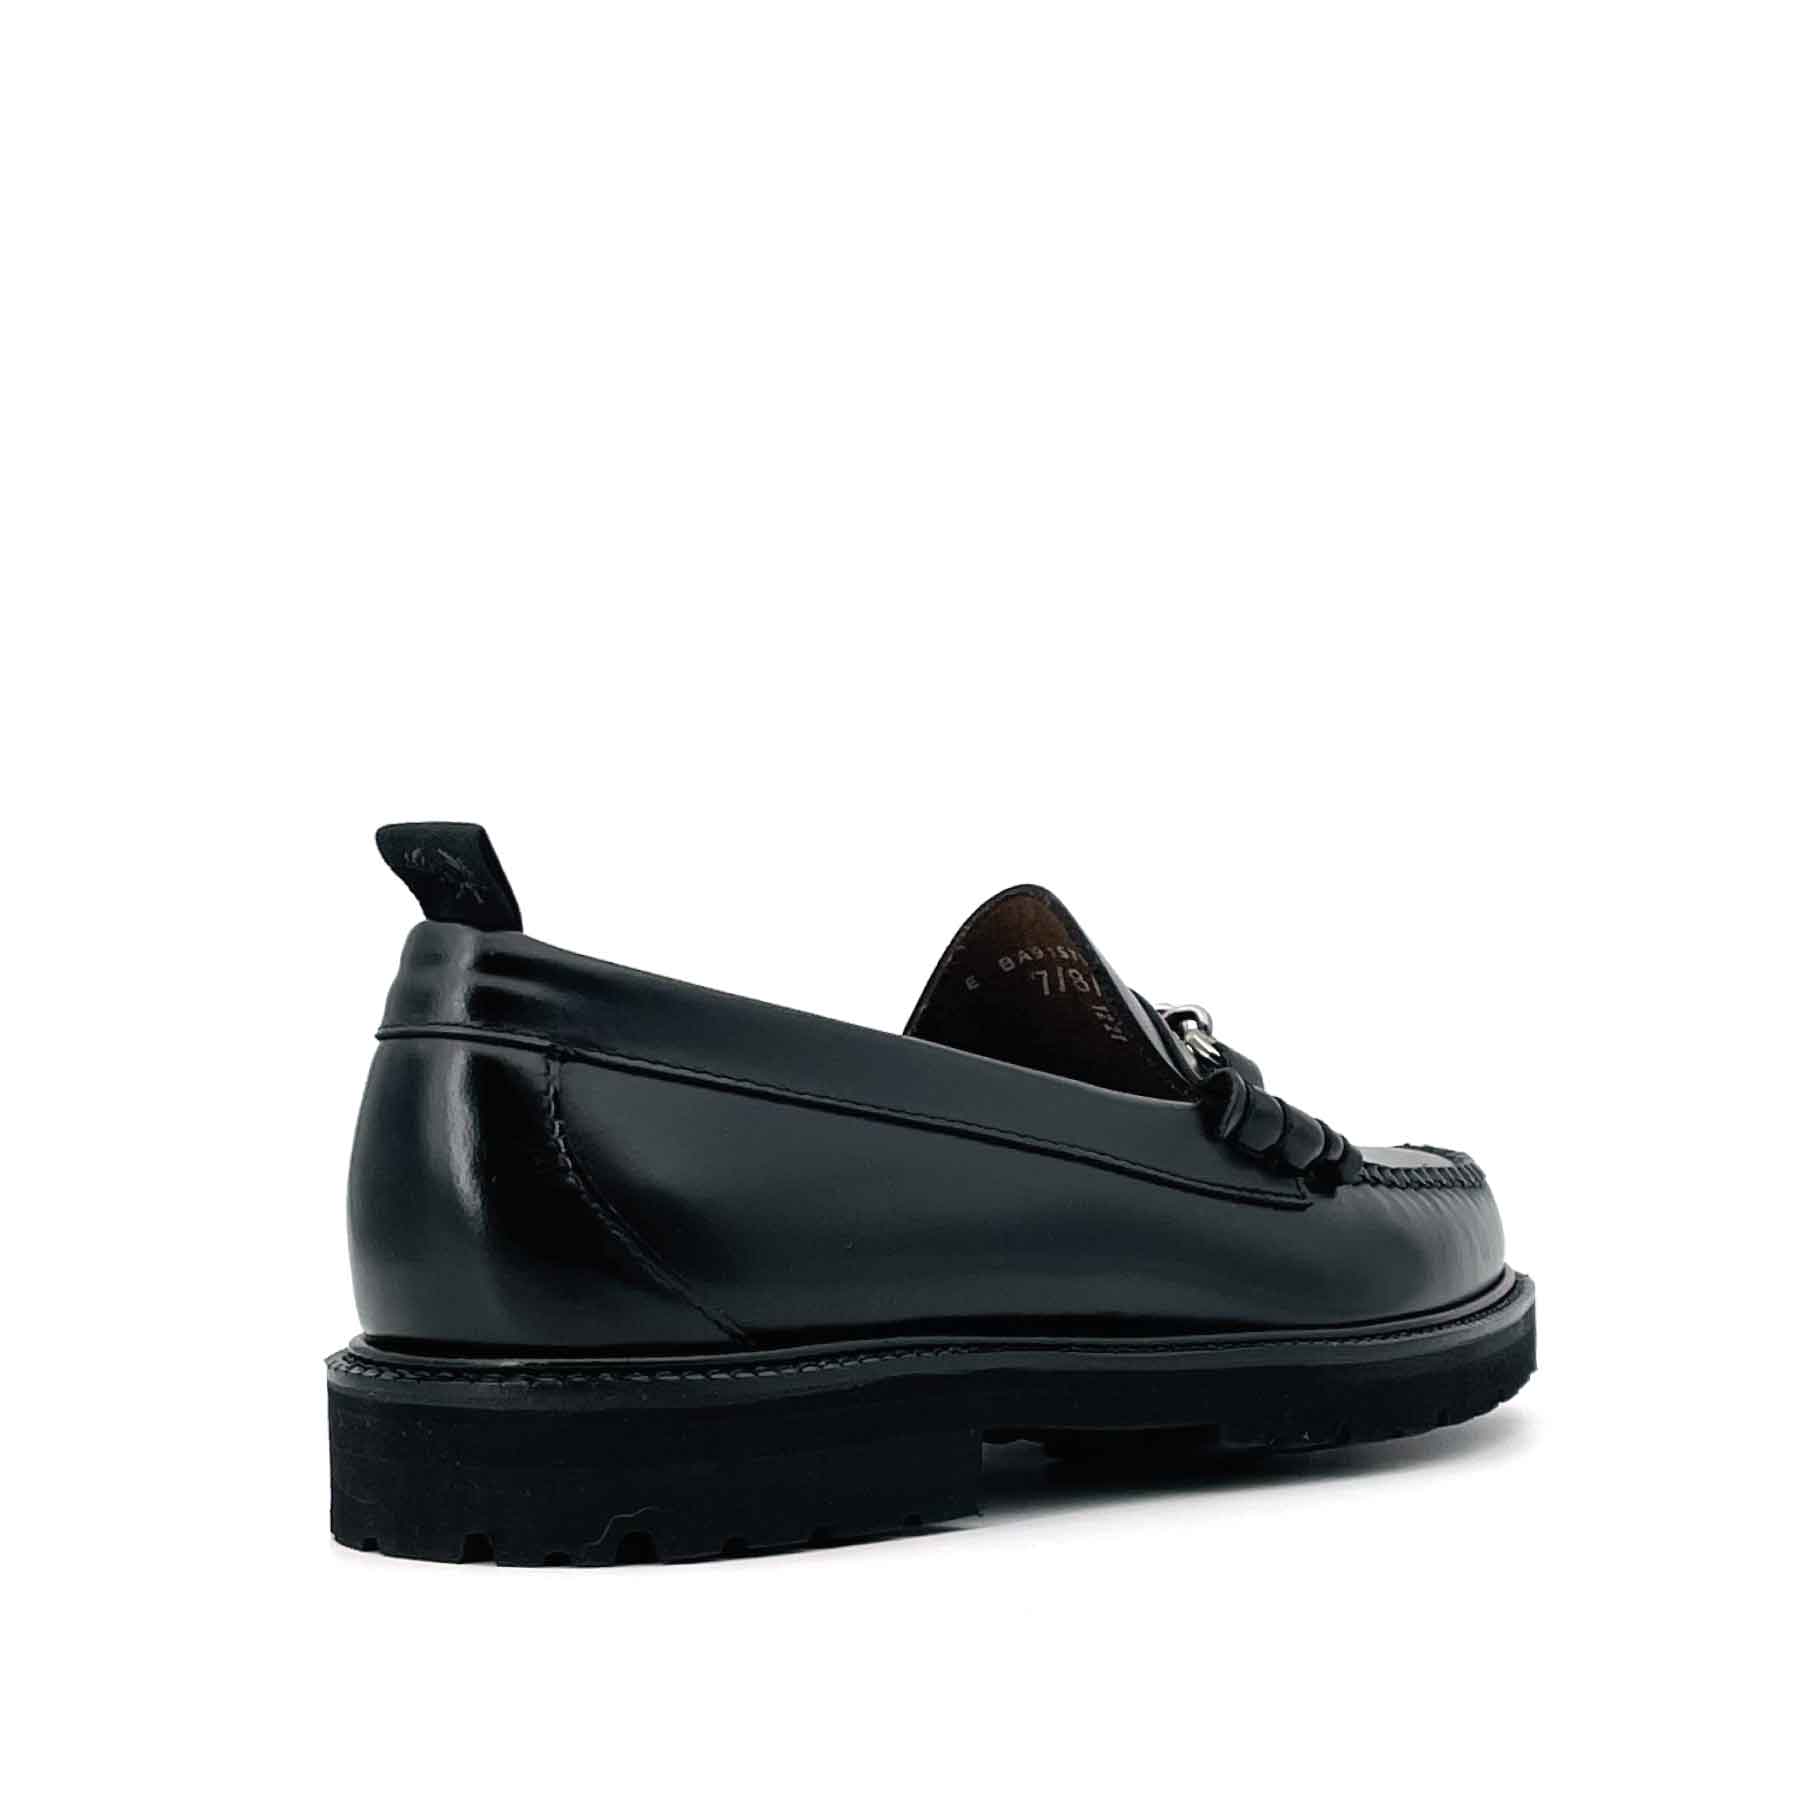 Fred Perry x G.H.BASS. Black